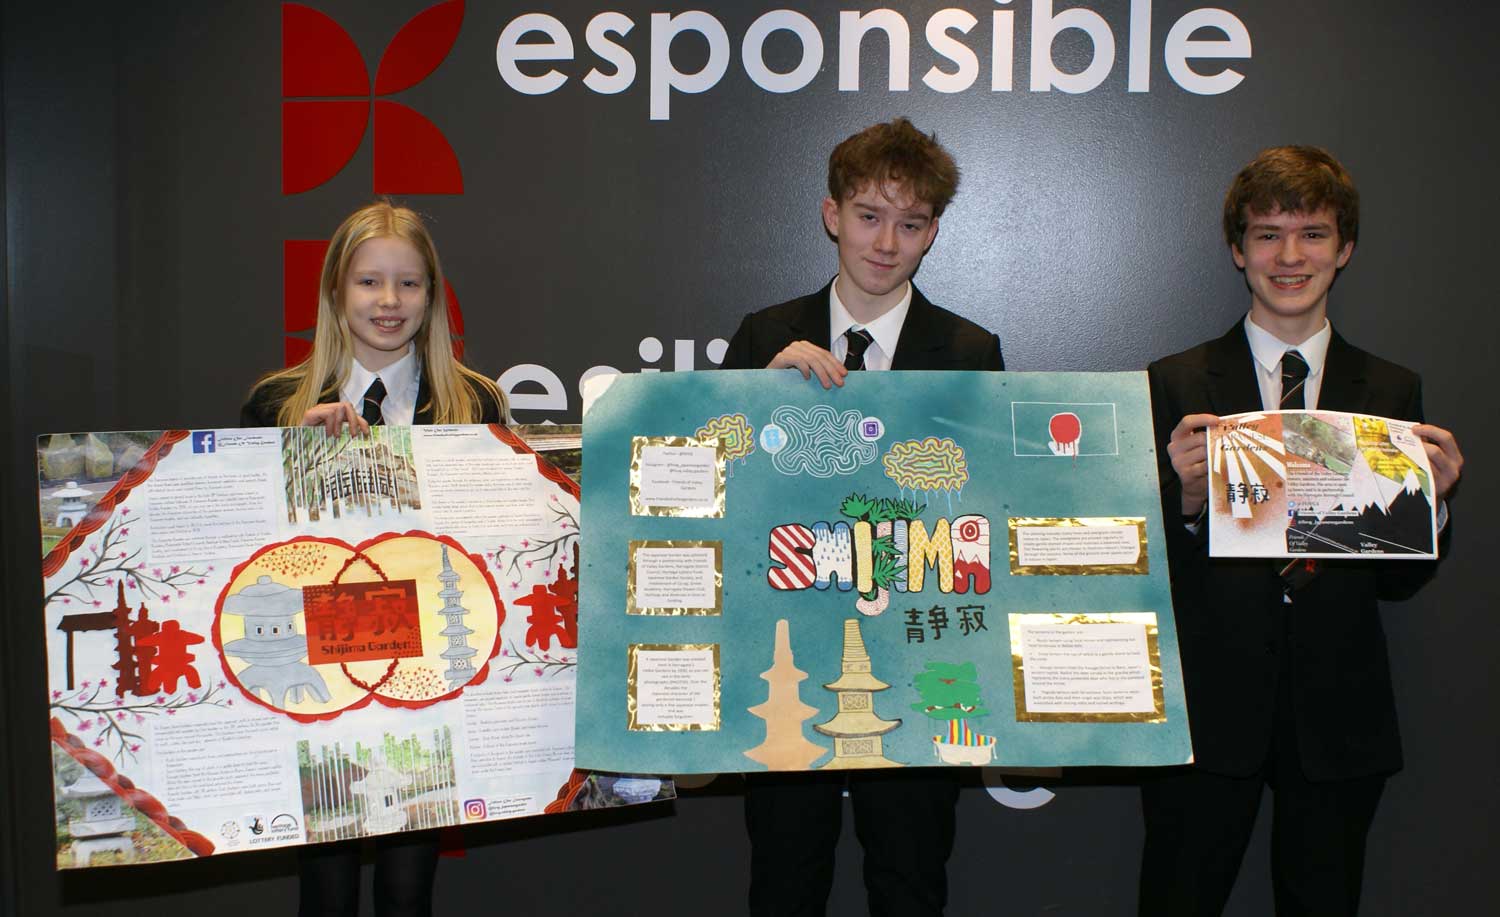 Students Chloe Verity, Oliver Houseman and Sam Corazzi will have their design work used to promote the new Japanese Garden at Harrogate’s Valley Gardens